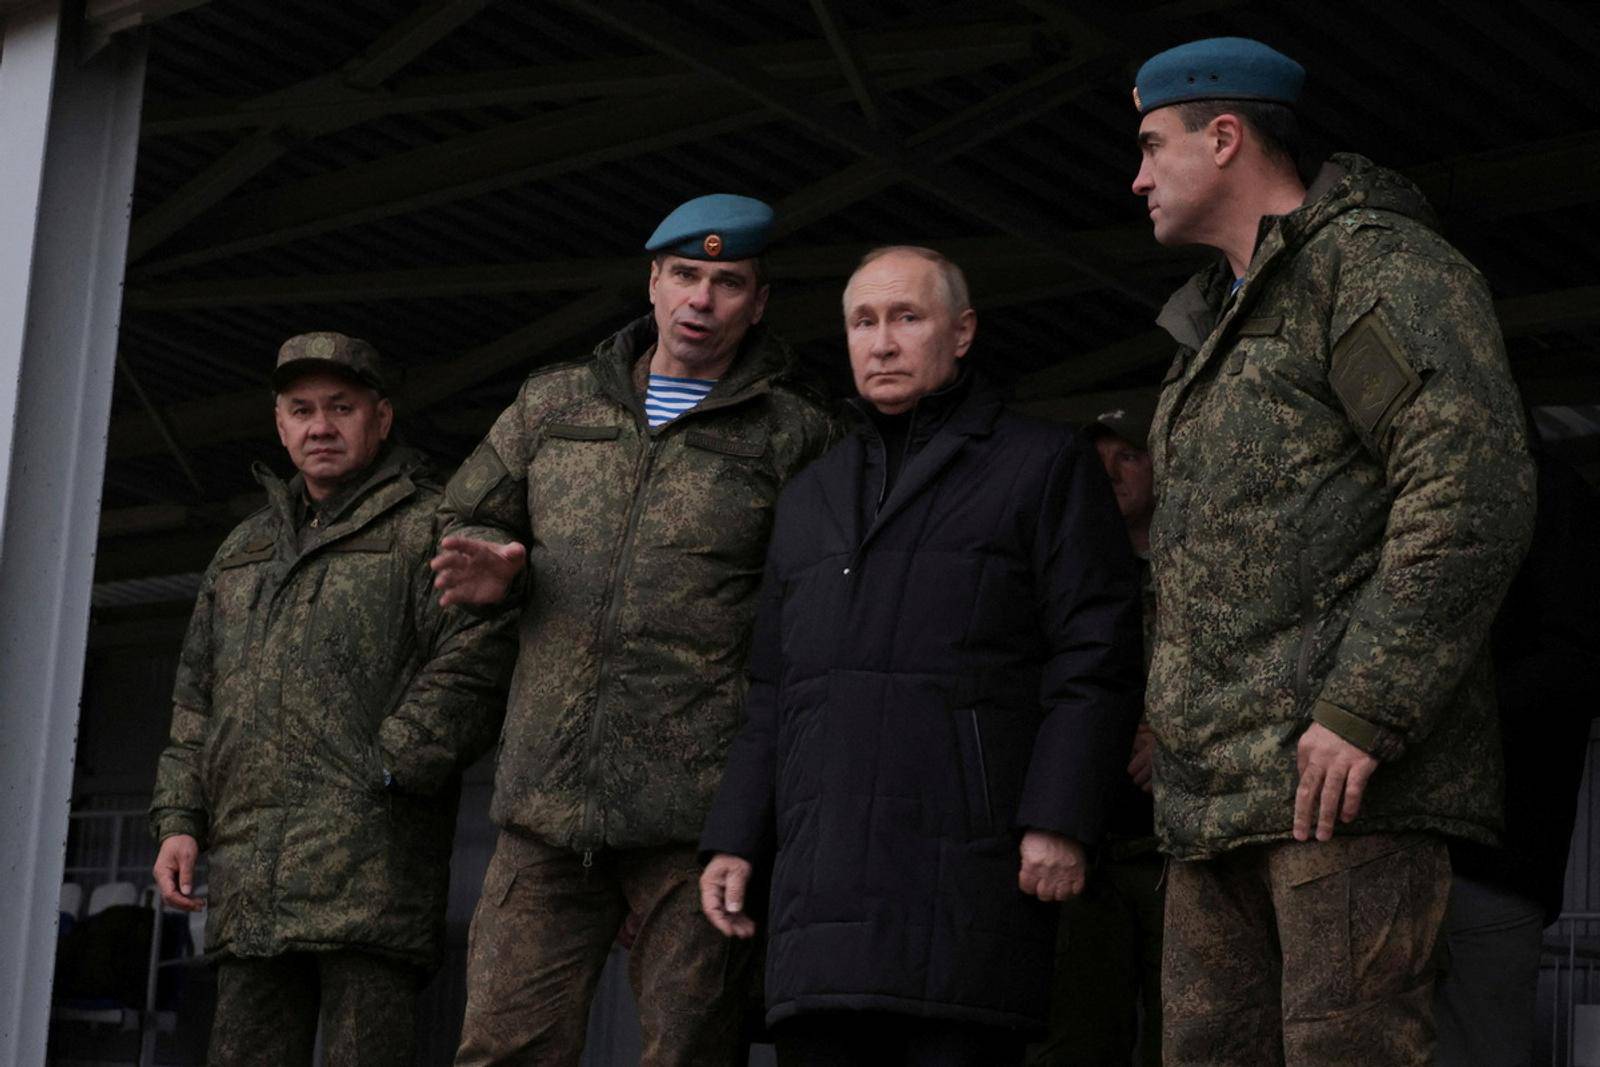 Russian President Vladimir Putin inspects preparations of mobilised reservists at a military training centre in Ryazan Region